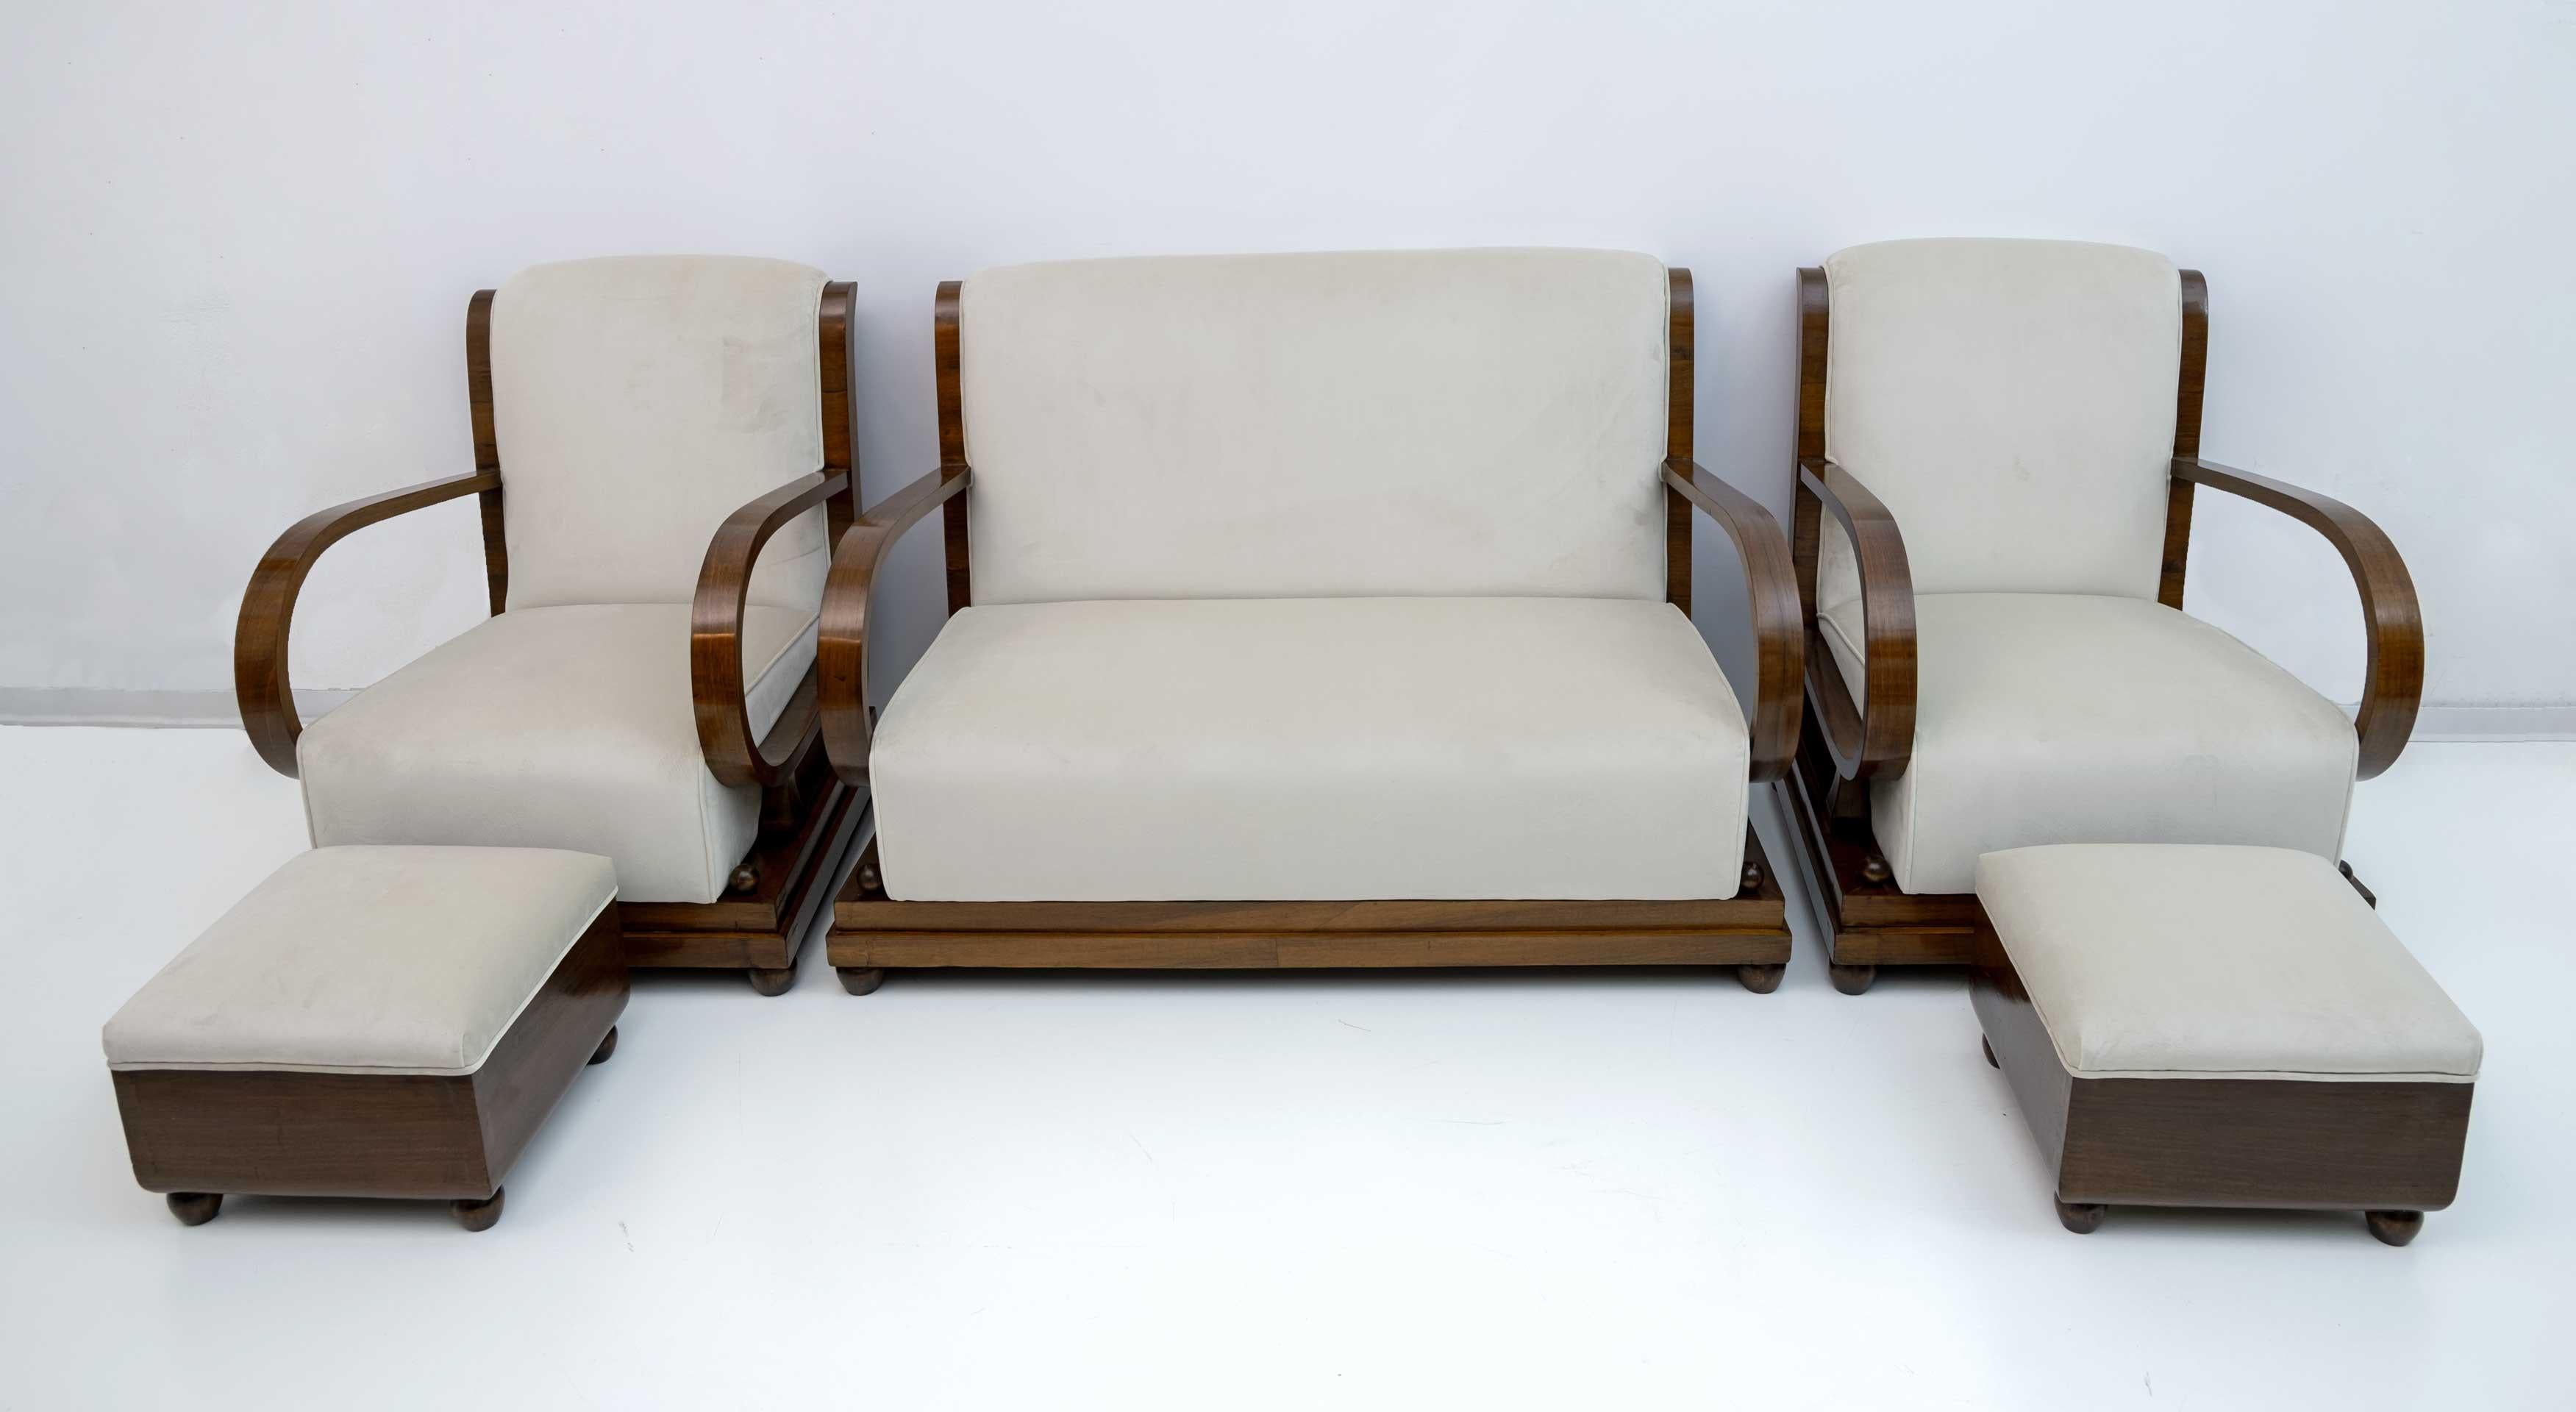 An Italian living room suite from the 1920s comprising a sofa, a pair of armchairs and a pair of ottomans. From the early Art Deco period of Northern Italy, in walnut and ivory velvet upholstery, the backs of the sofa and armchairs are gracefully